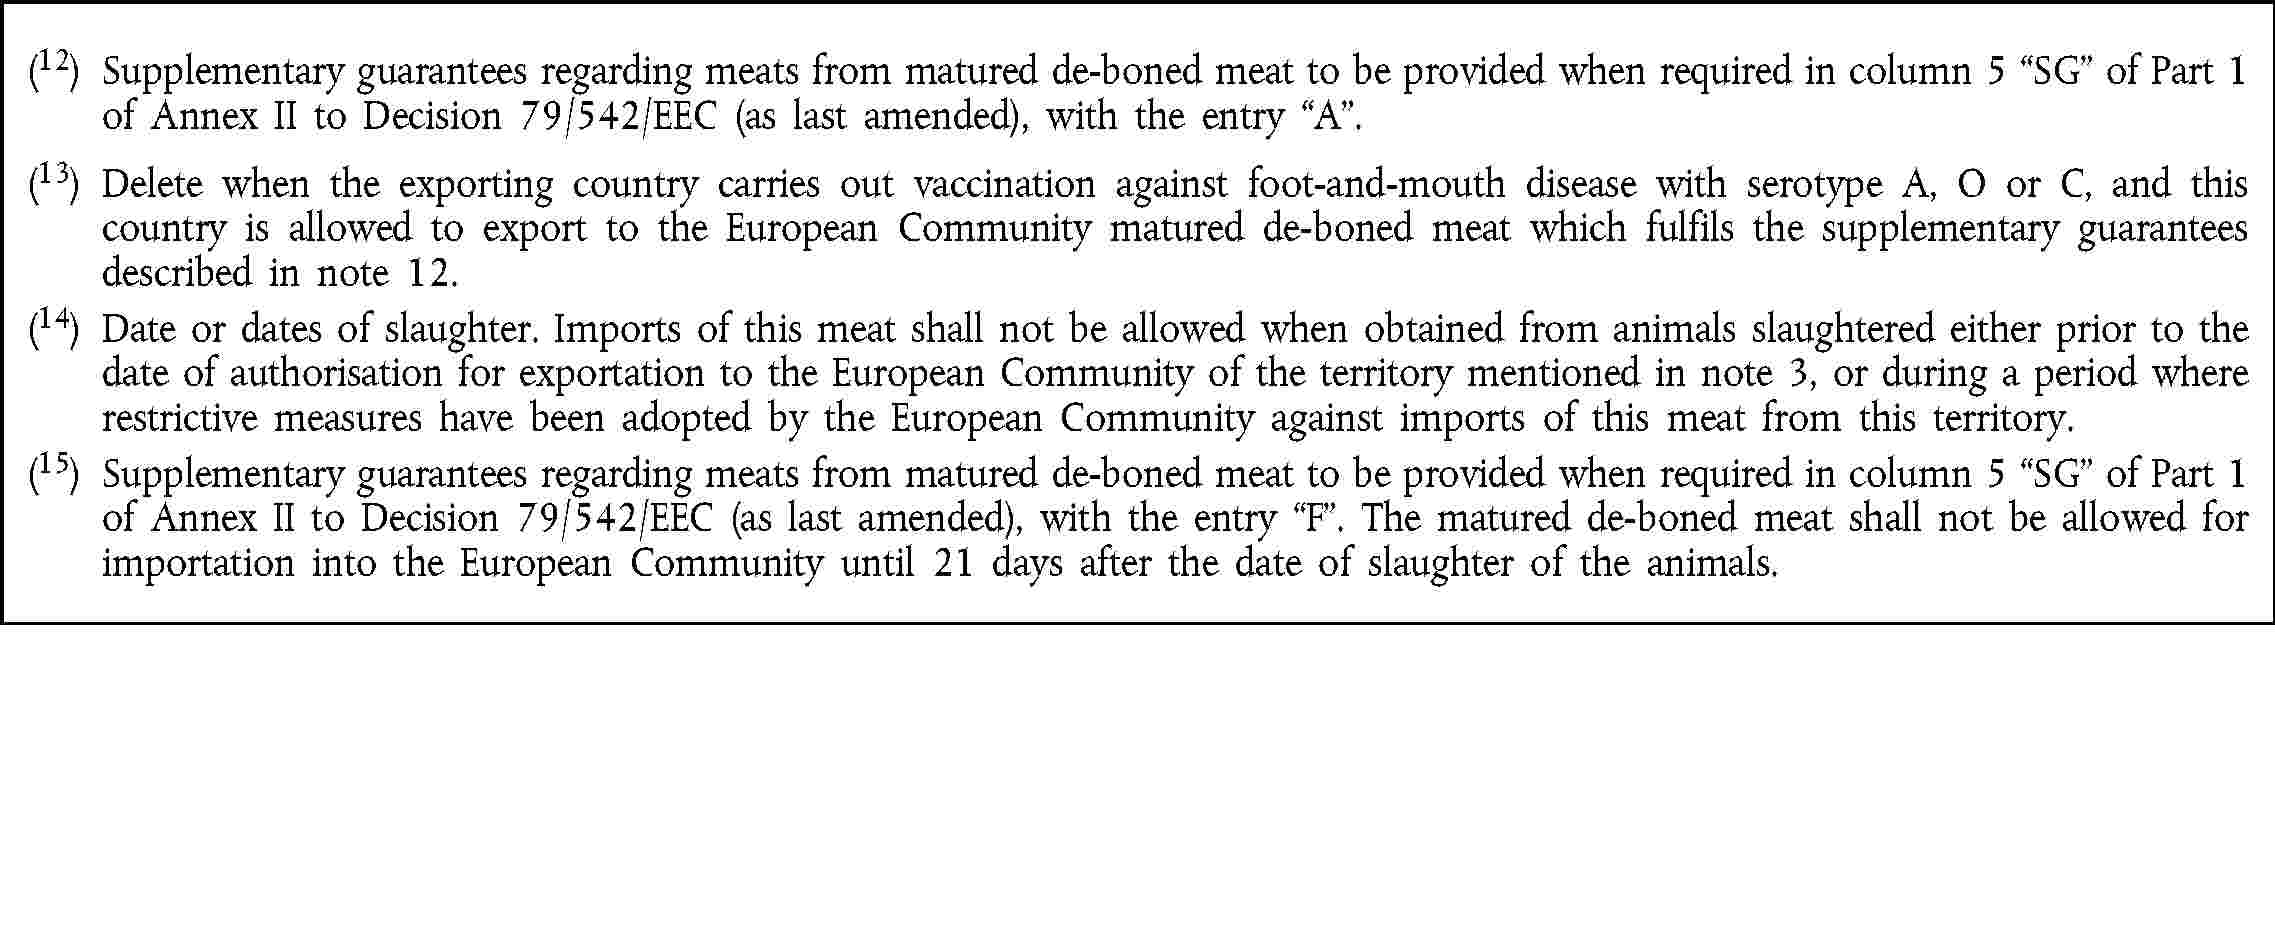 (12) Supplementary guarantees regarding meats from matured de-boned meat to be provided when required in column 5 SG of Part 1 of Annex II to Decision 79/542/EEC (as last amended), with the entry A.(13) Delete when the exporting country carries out vaccination against foot-and-mouth disease with serotype A, O or C, and this country is allowed to export to the European Community matured de-boned meat which fulfils the supplementary guarantees described in note 12.(14) Date or dates of slaughter. Imports of this meat shall not be allowed when obtained from animals slaughtered either prior to the date of authorisation for exportation to the European Community of the territory mentioned in note 3, or during a period where restrictive measures have been adopted by the European Community against imports of this meat from this territory.(15) Supplementary guarantees regarding meats from matured de-boned meat to be provided when required in column 5 SG of Part 1 of Annex II to Decision 79/542/EEC (as last amended), with the entry F. The matured de-boned meat shall not be allowed for importation into the European Community until 21 days after the date of slaughter of the animals.